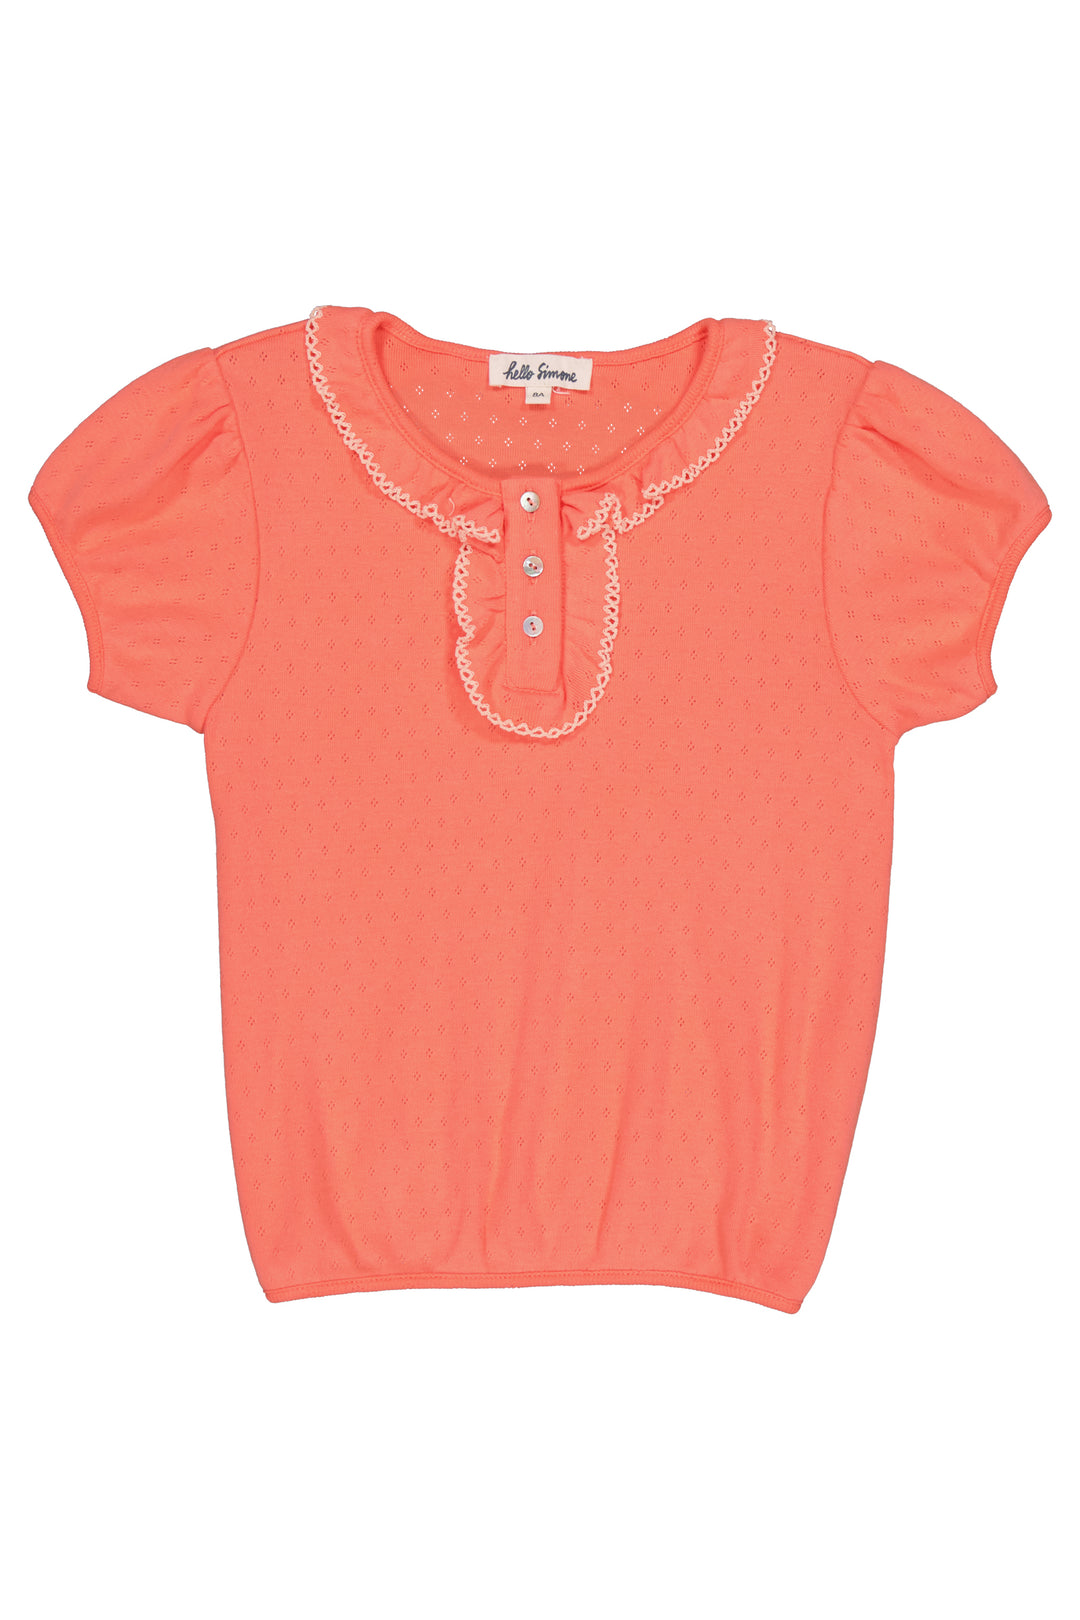 Top Girl Paquerette Coral - قمة